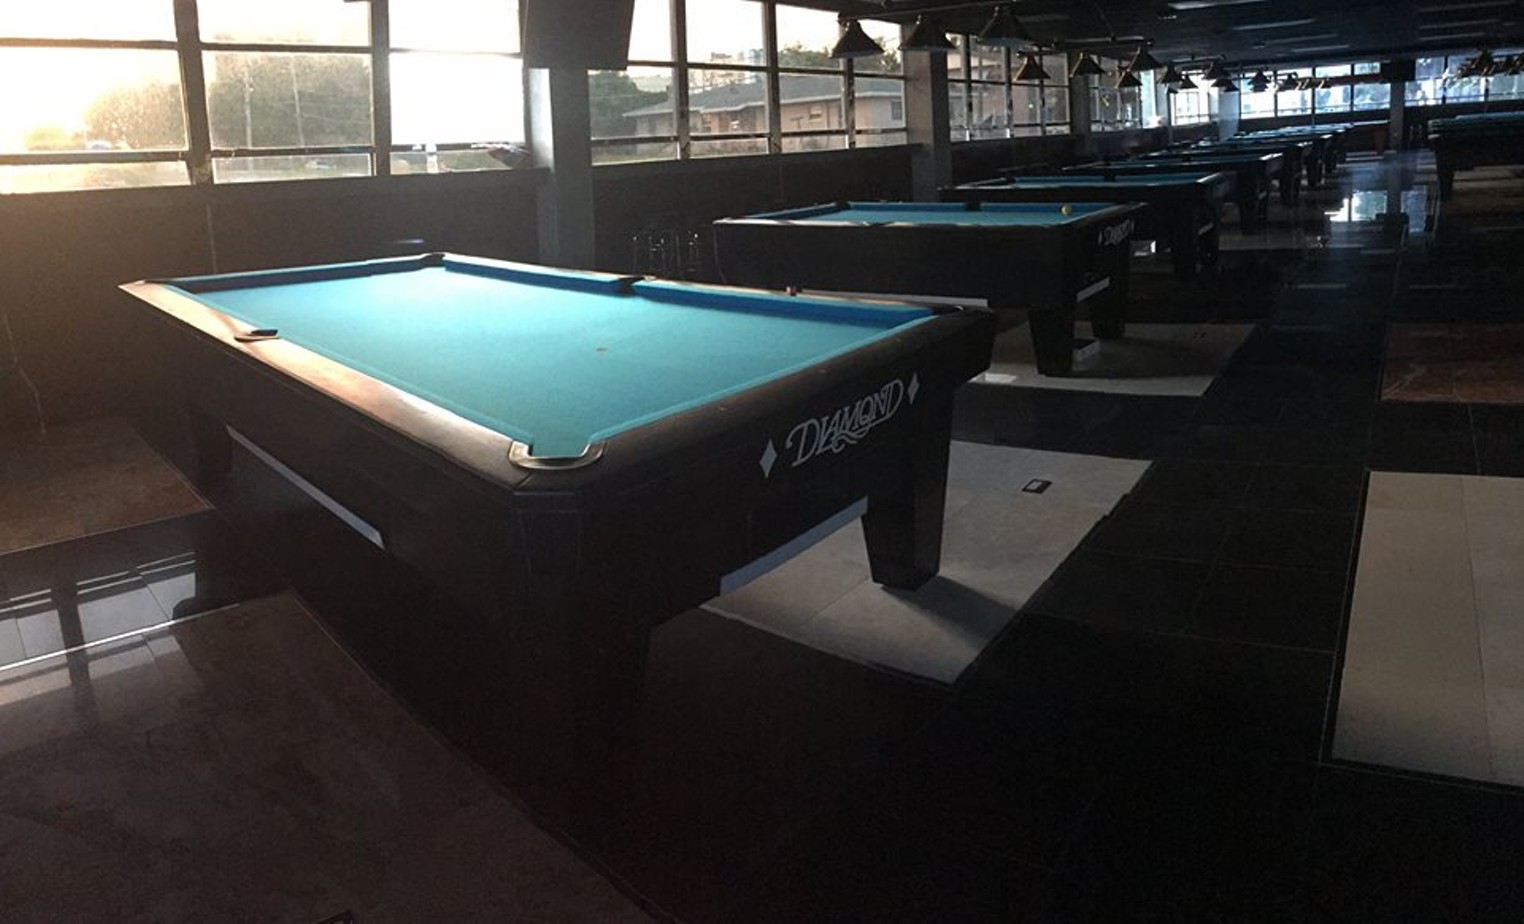 Best Pool Hall 2020 KandK Billiard and Sports Bar Best Restaurants, Bars, Clubs, Music and Stores in Miami Miami New Times